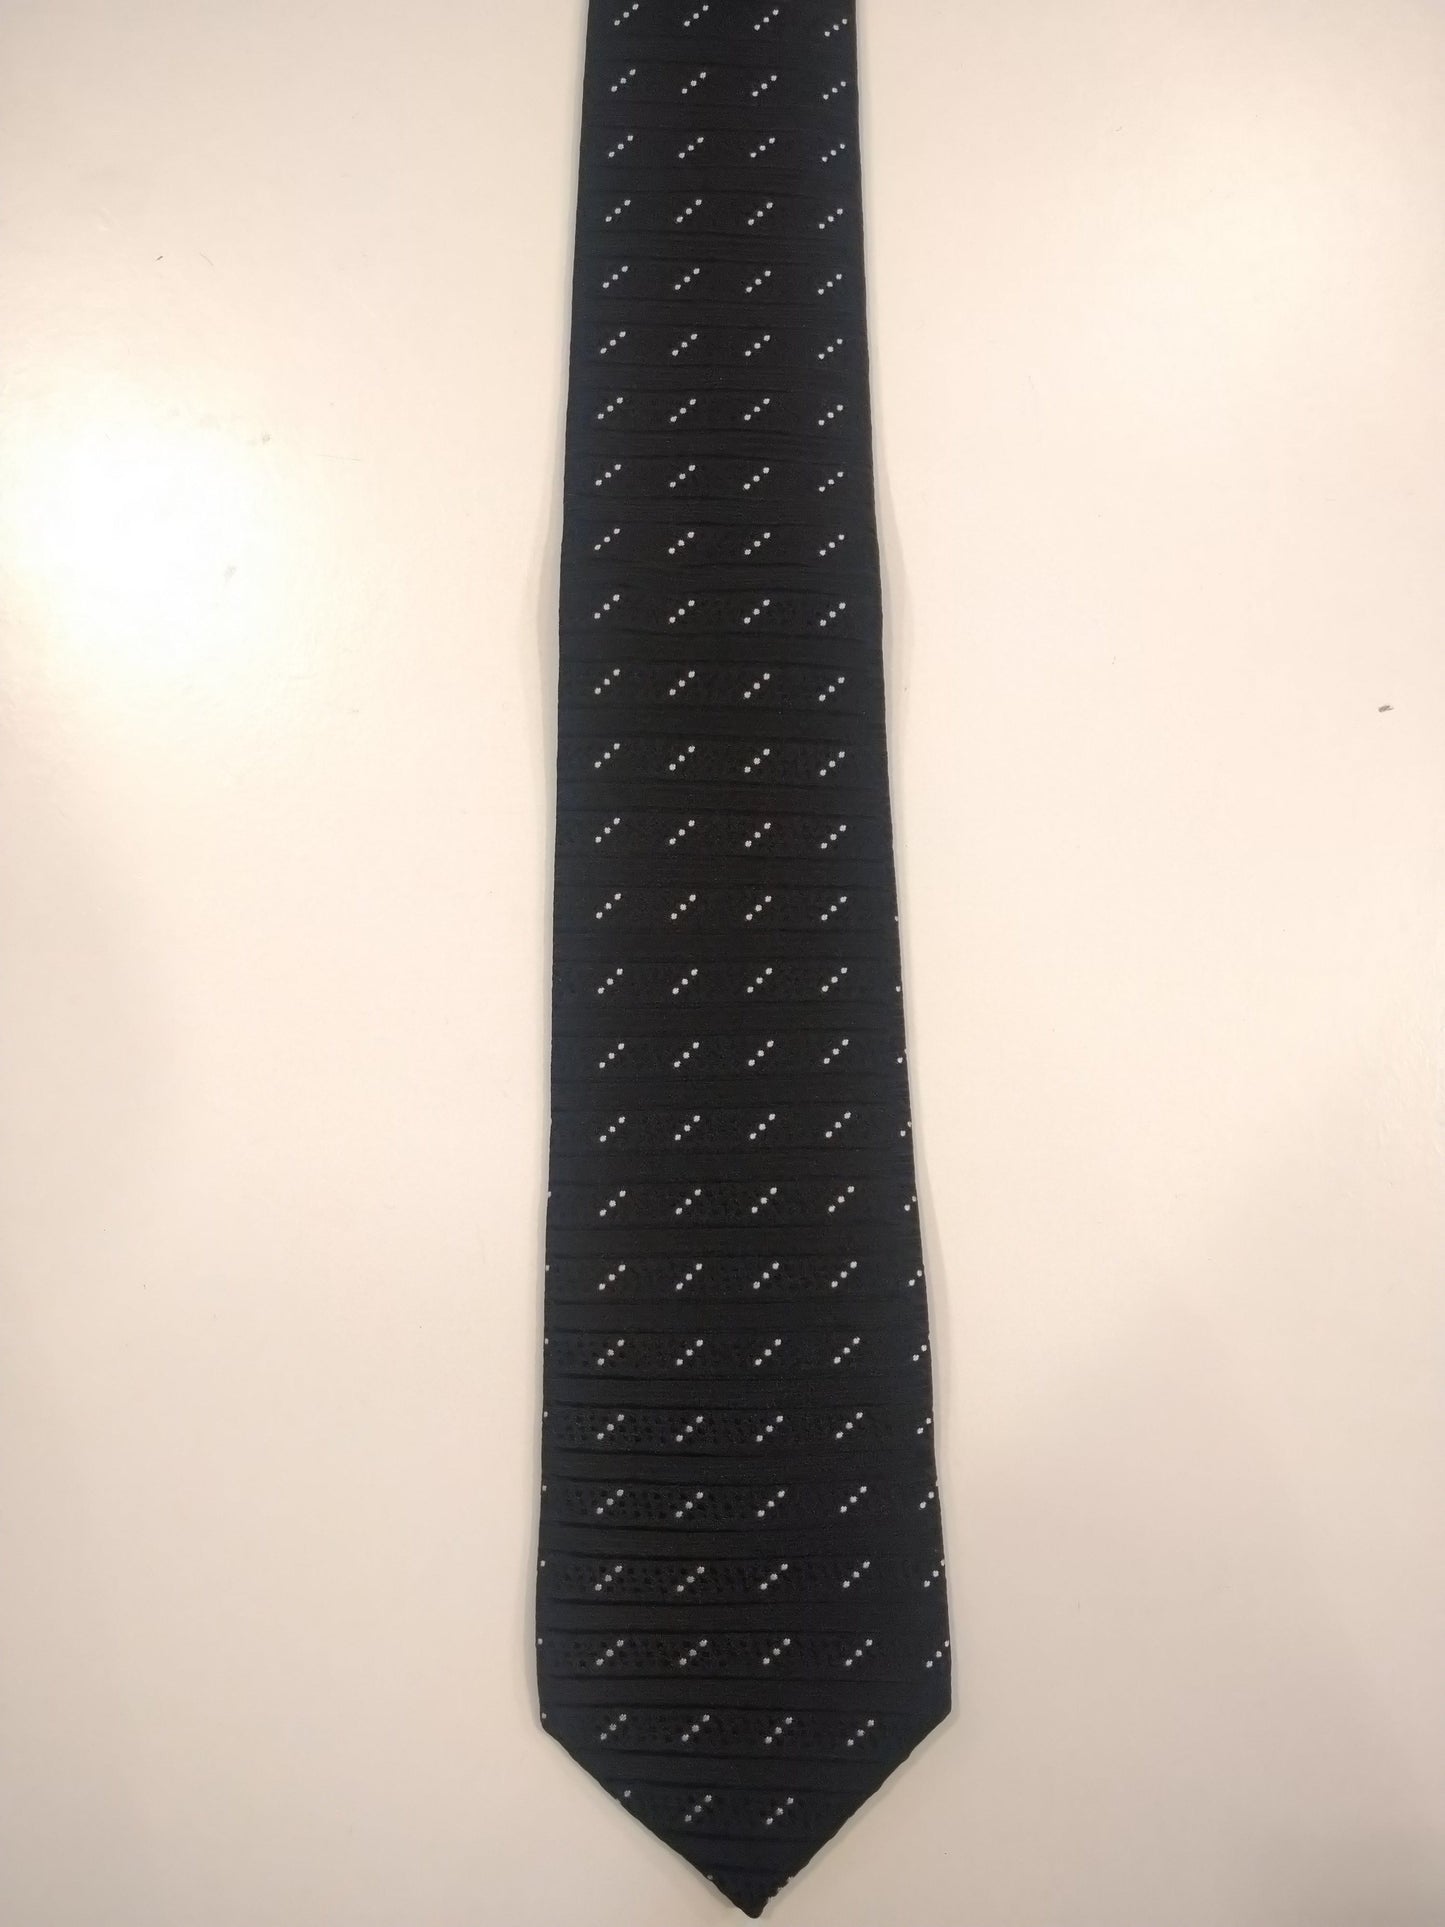 Dragon polyester tie. Black and white tangible motif.